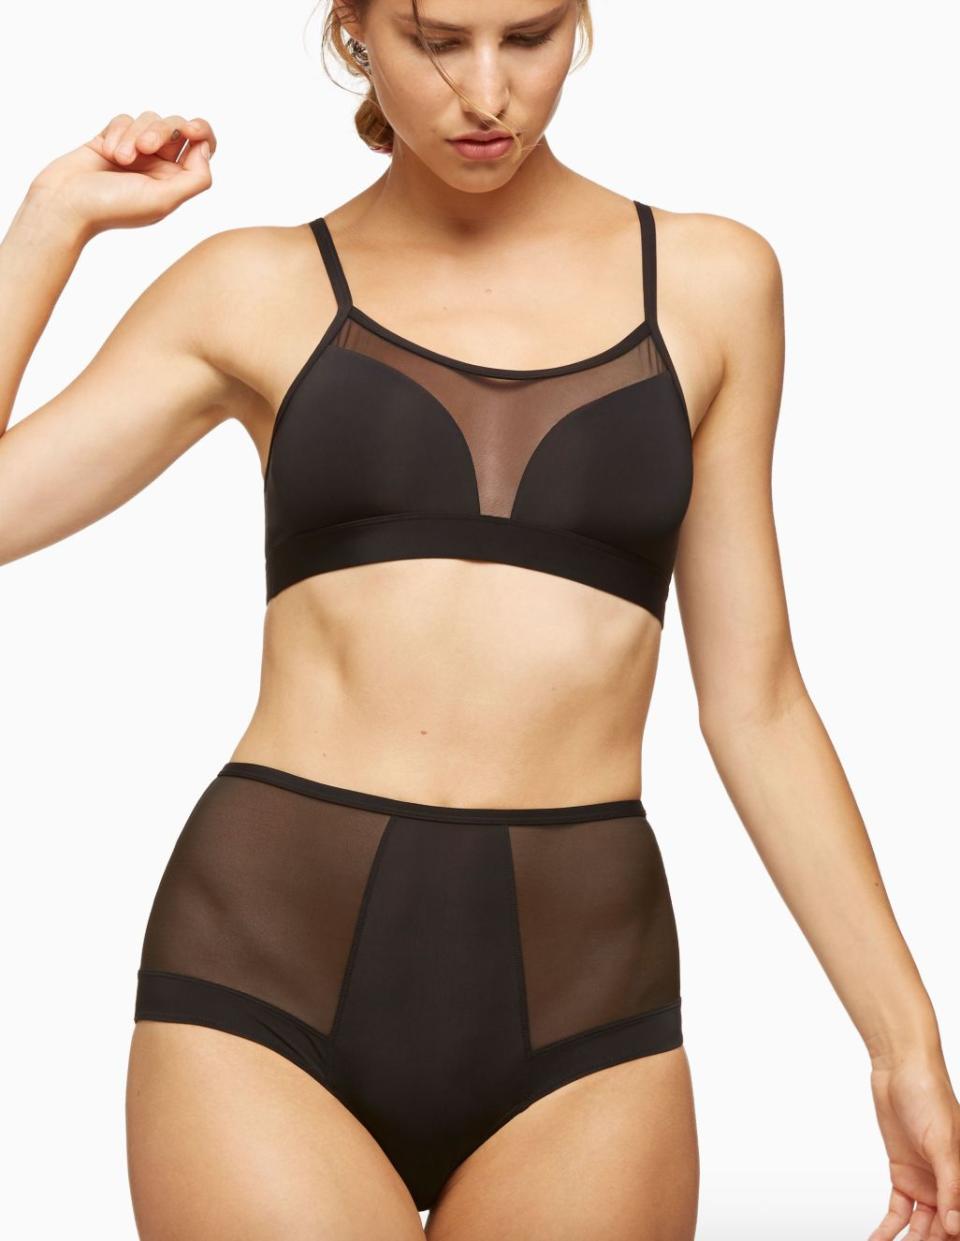 If you're into mesh styles, <a href="https://www.blushlingerie.com/" target="_blank" rel="noopener noreferrer">Blush</a> has you (sheerly) covered. The brand also has a few more traditional lace styles, but nothing that feels too over-the-top.<br /><br />Blush Bound bralette and briefs available in sizes XS to XL.<br /><br /><strong>Get the Blush <a href="https://www.blushlingerie.com/ca_en/bound-bralette-onyx.html" target="_blank" rel="noopener noreferrer">Bound bralette for $38</a> and <a href="https://www.blushlingerie.com/ca_en/bound-high-waist-brief-onyx.html?___SID=U&amp;cat=661" target="_blank" rel="noopener noreferrer">high-waist brief for $32</a>.</strong>